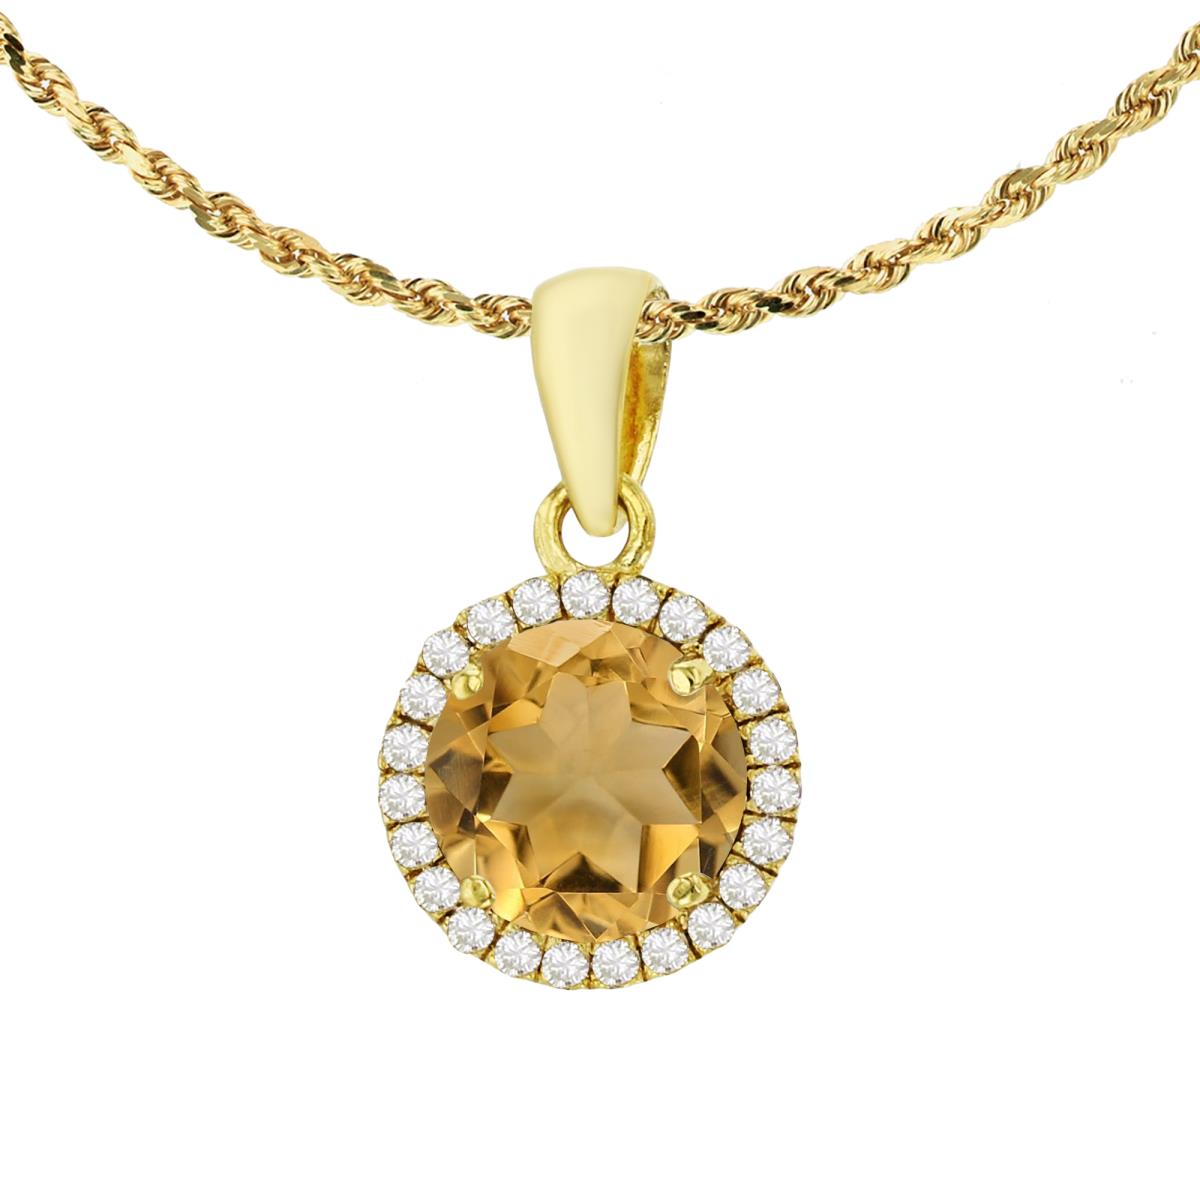 10K Yellow Gold 7mm Round Citrine & 0.12 CTTW Diamond Halo 18" Rope Chain Necklace